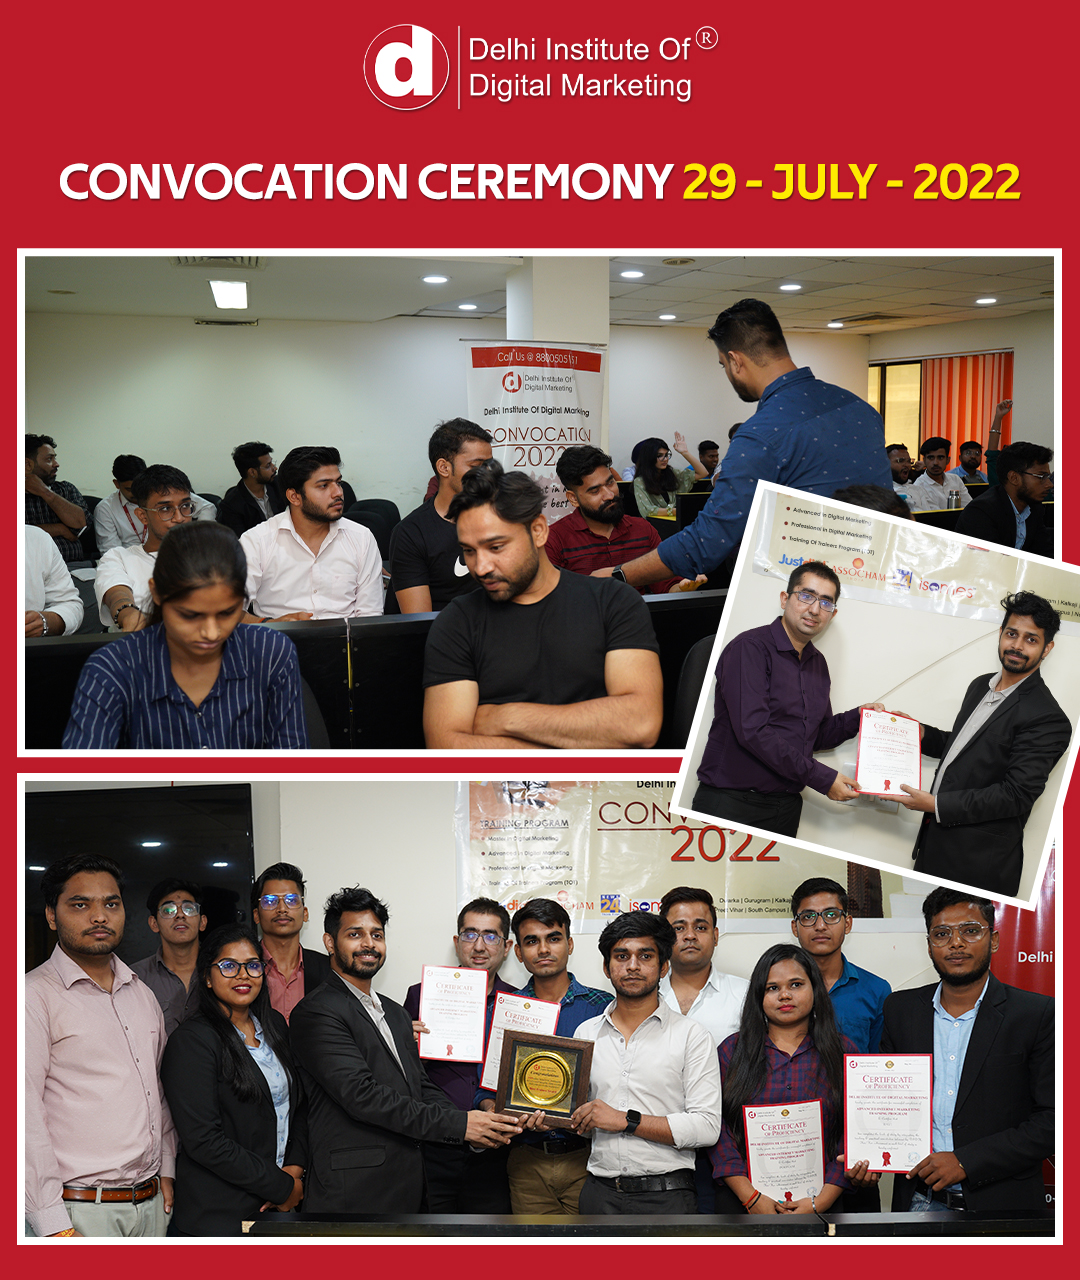 DIDM Students Convocation Ceremony